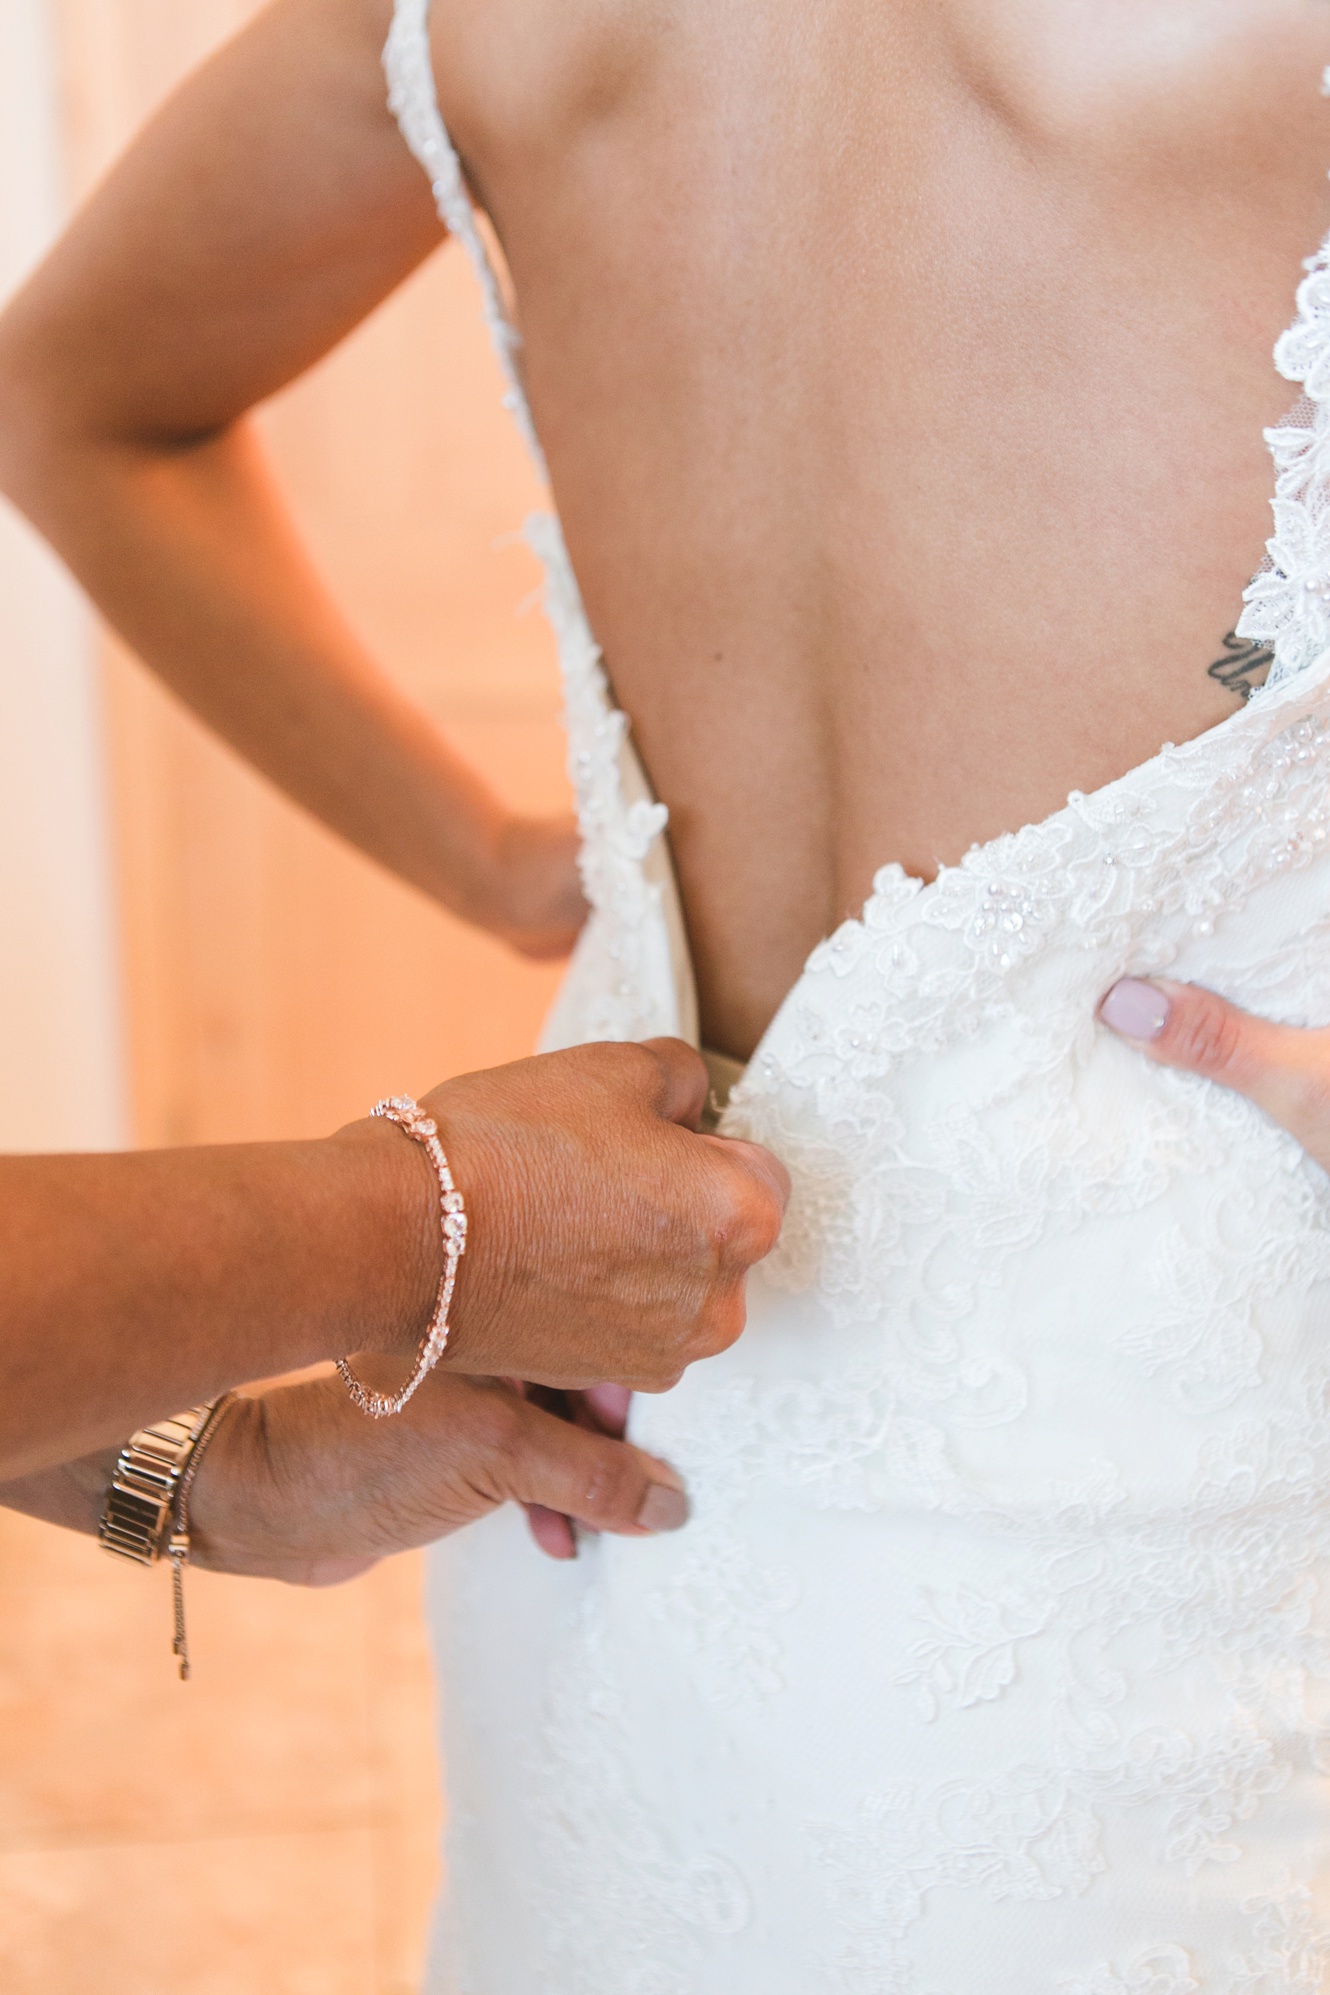 Bride getting zipped into her dress photo